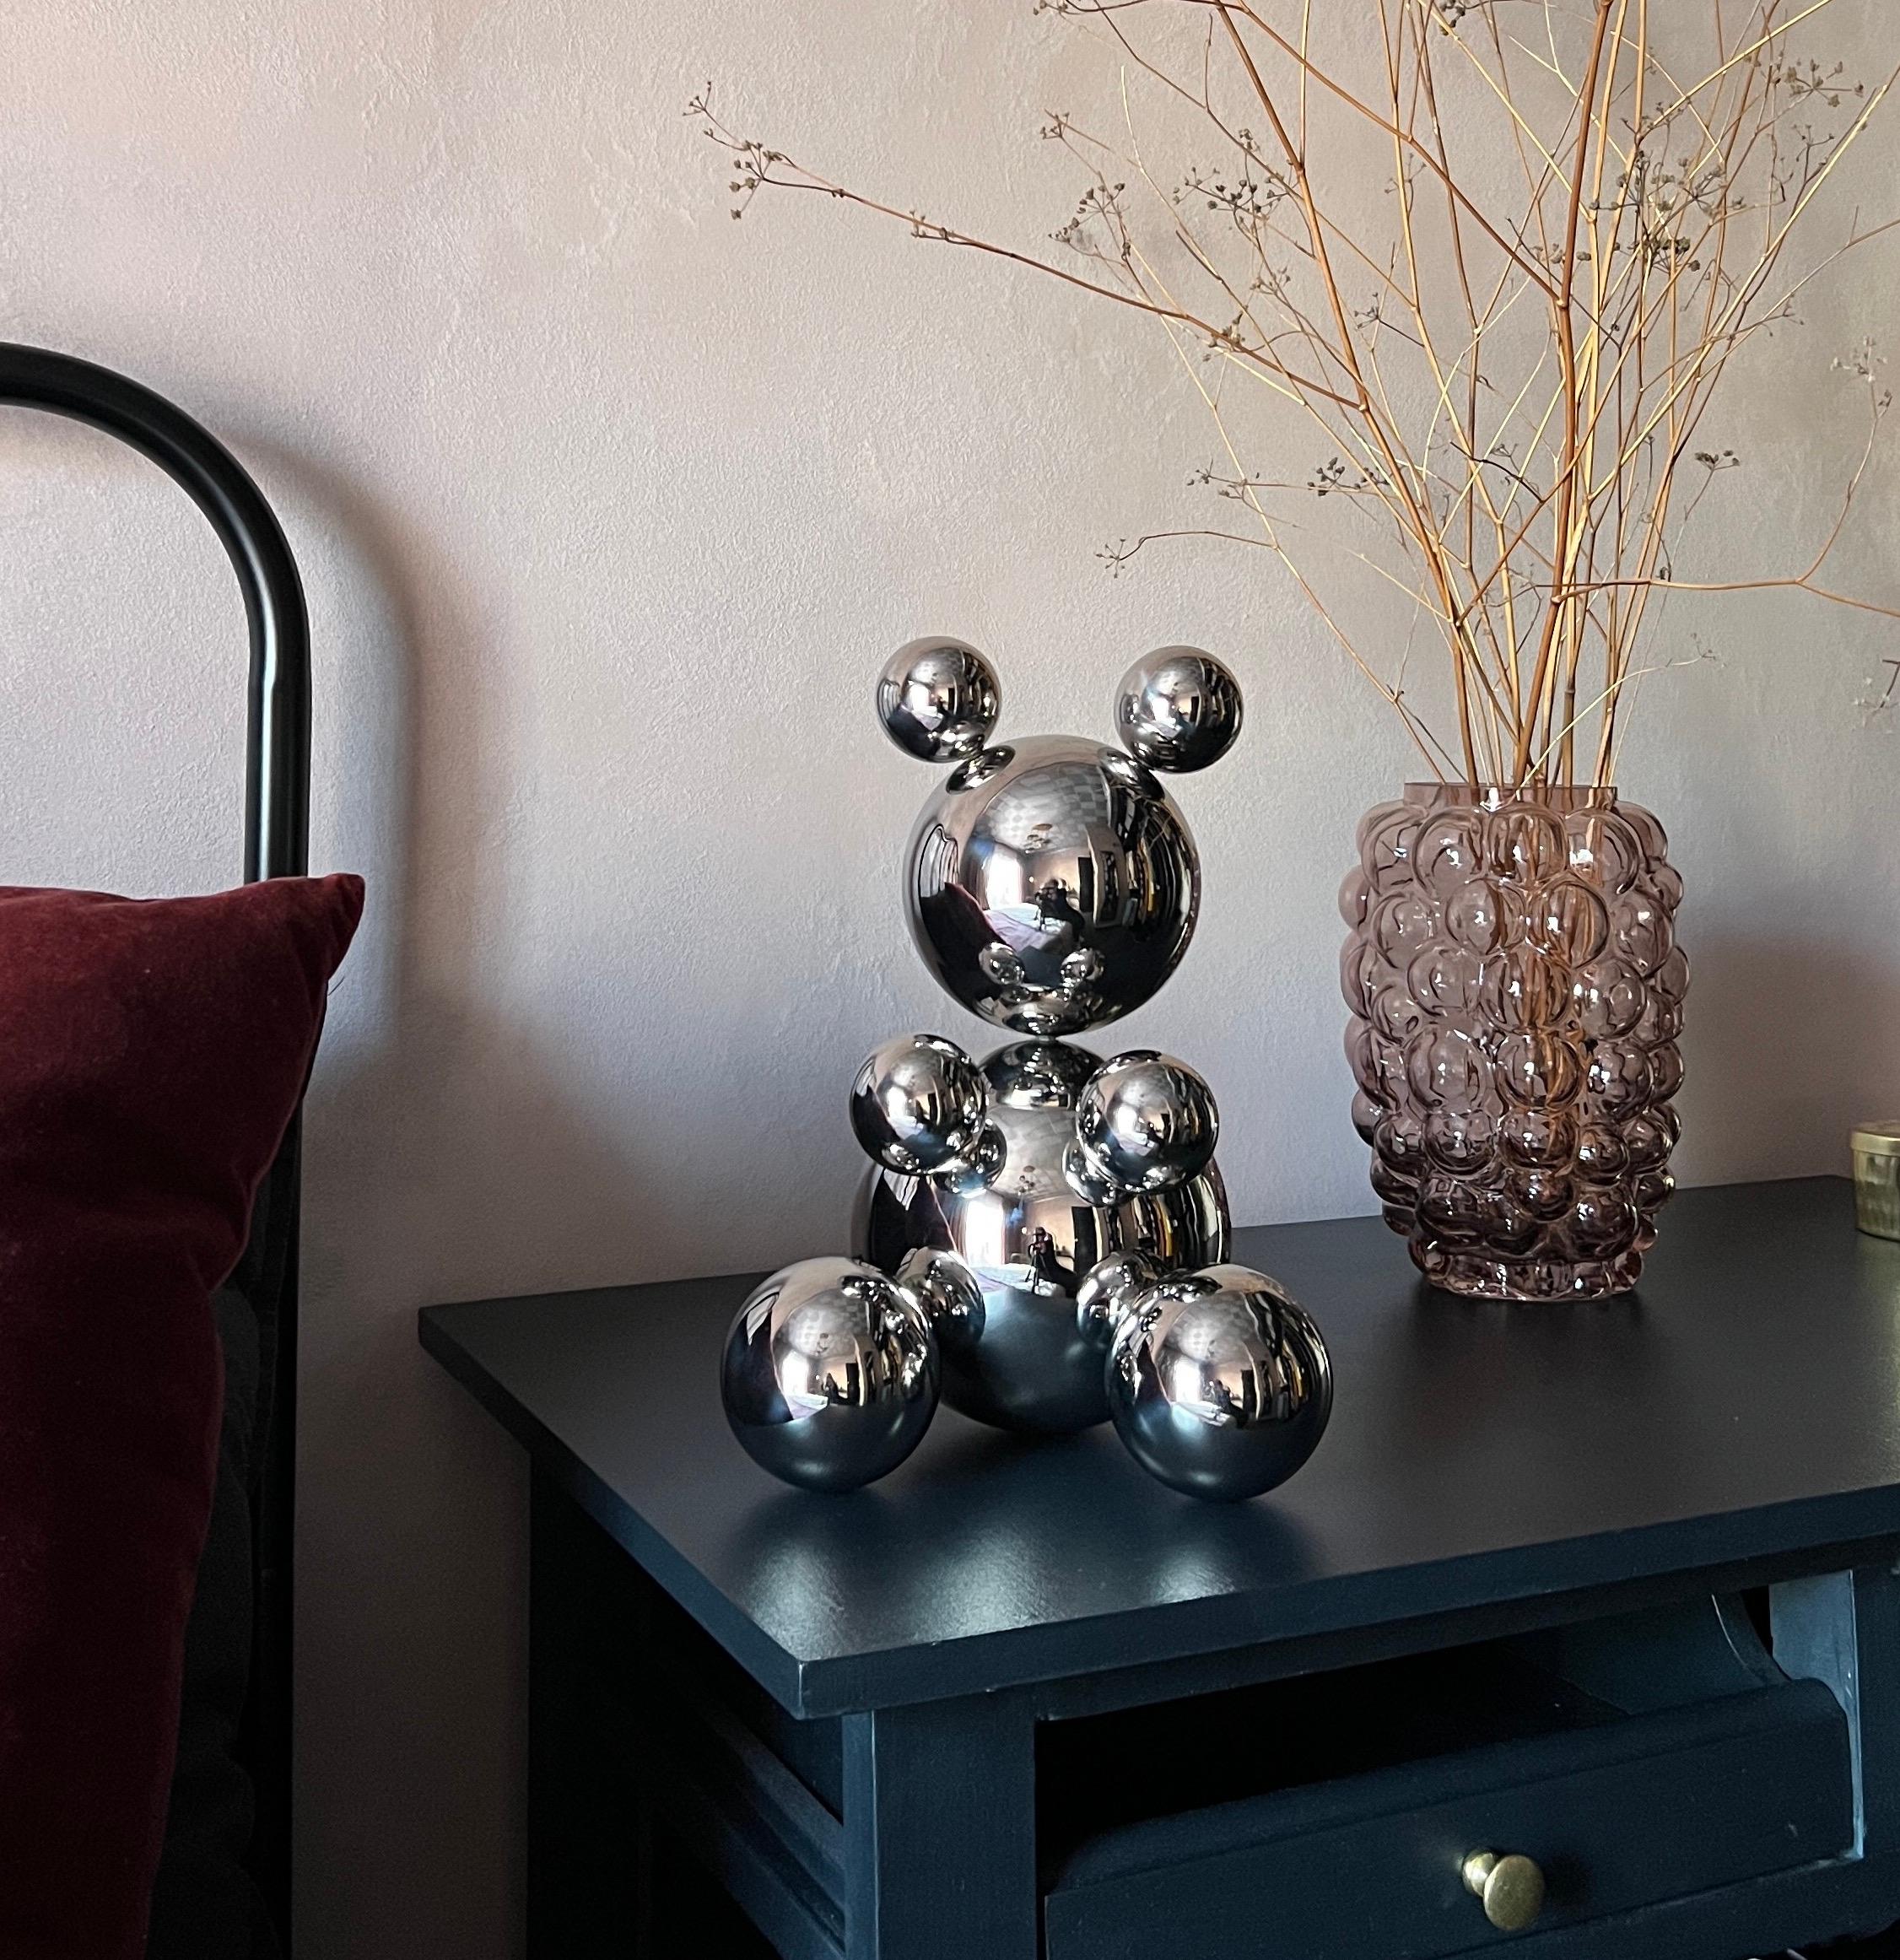 Middle Stainless Steel Bear 'Lucas' Sculpture Minimalistic Animal - Beige Abstract Sculpture by IRENA TONE